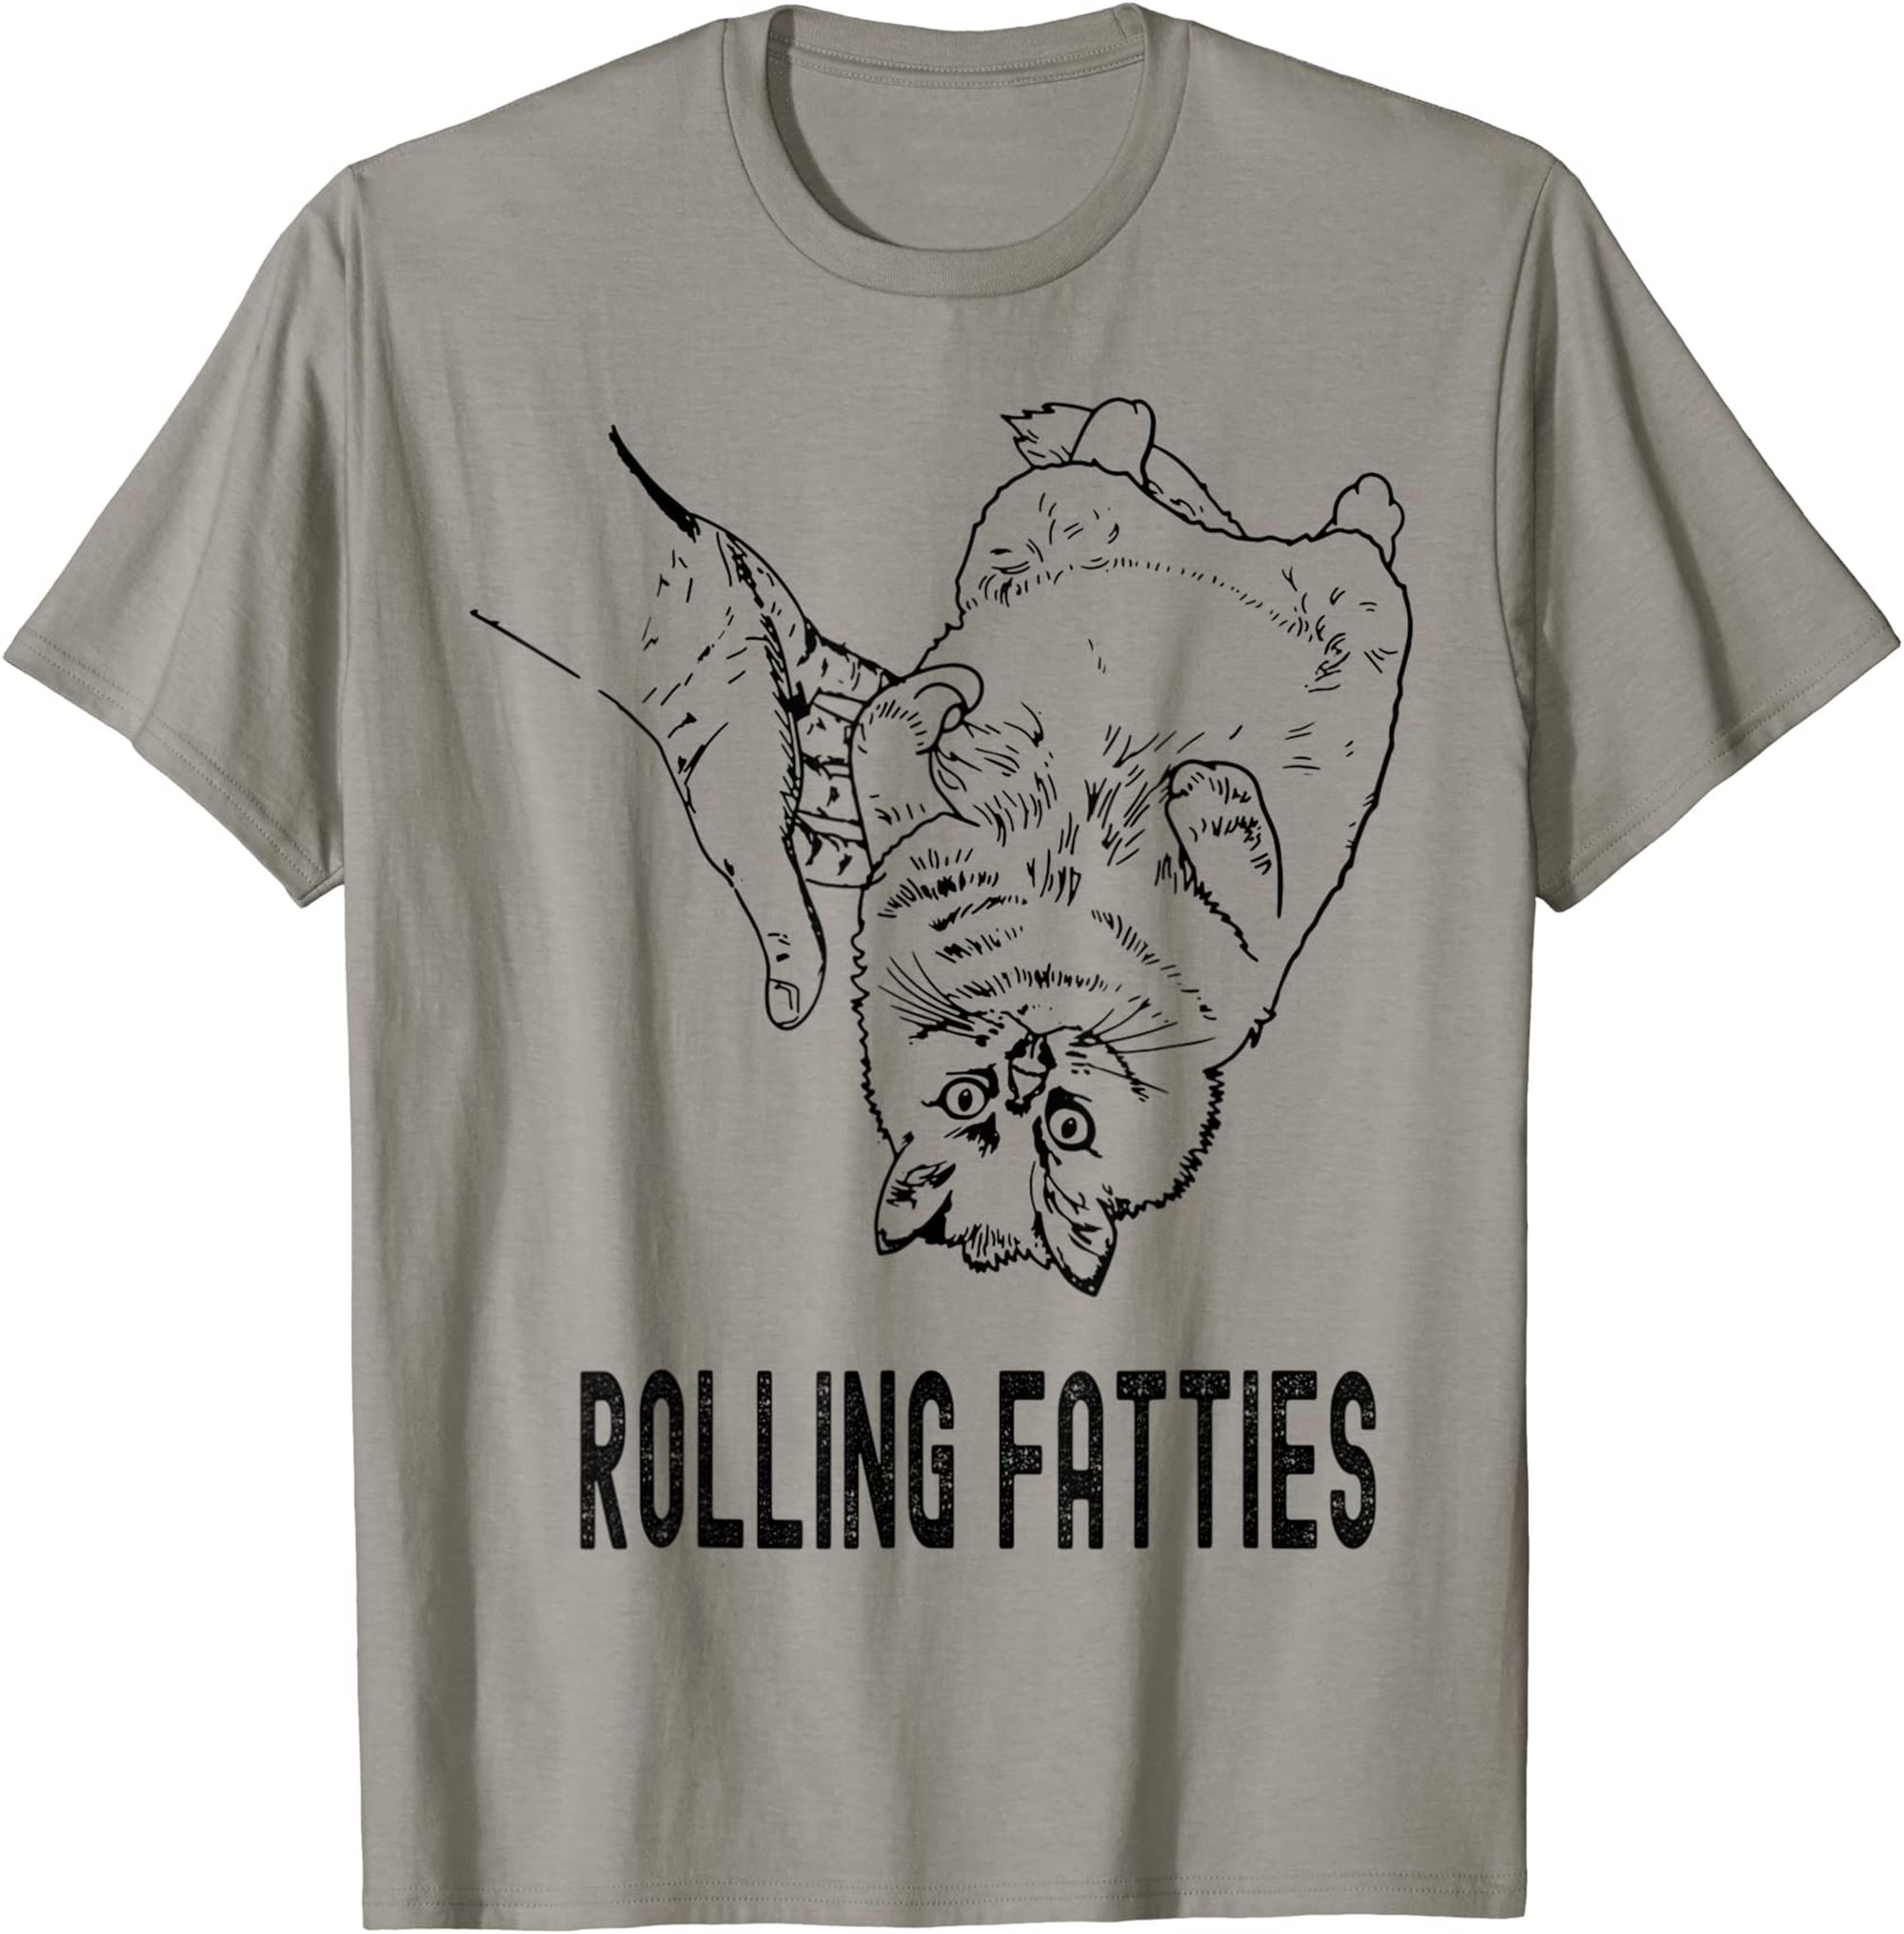 Rolling Fatties Cat T-shirt Full Size Up To 5xl